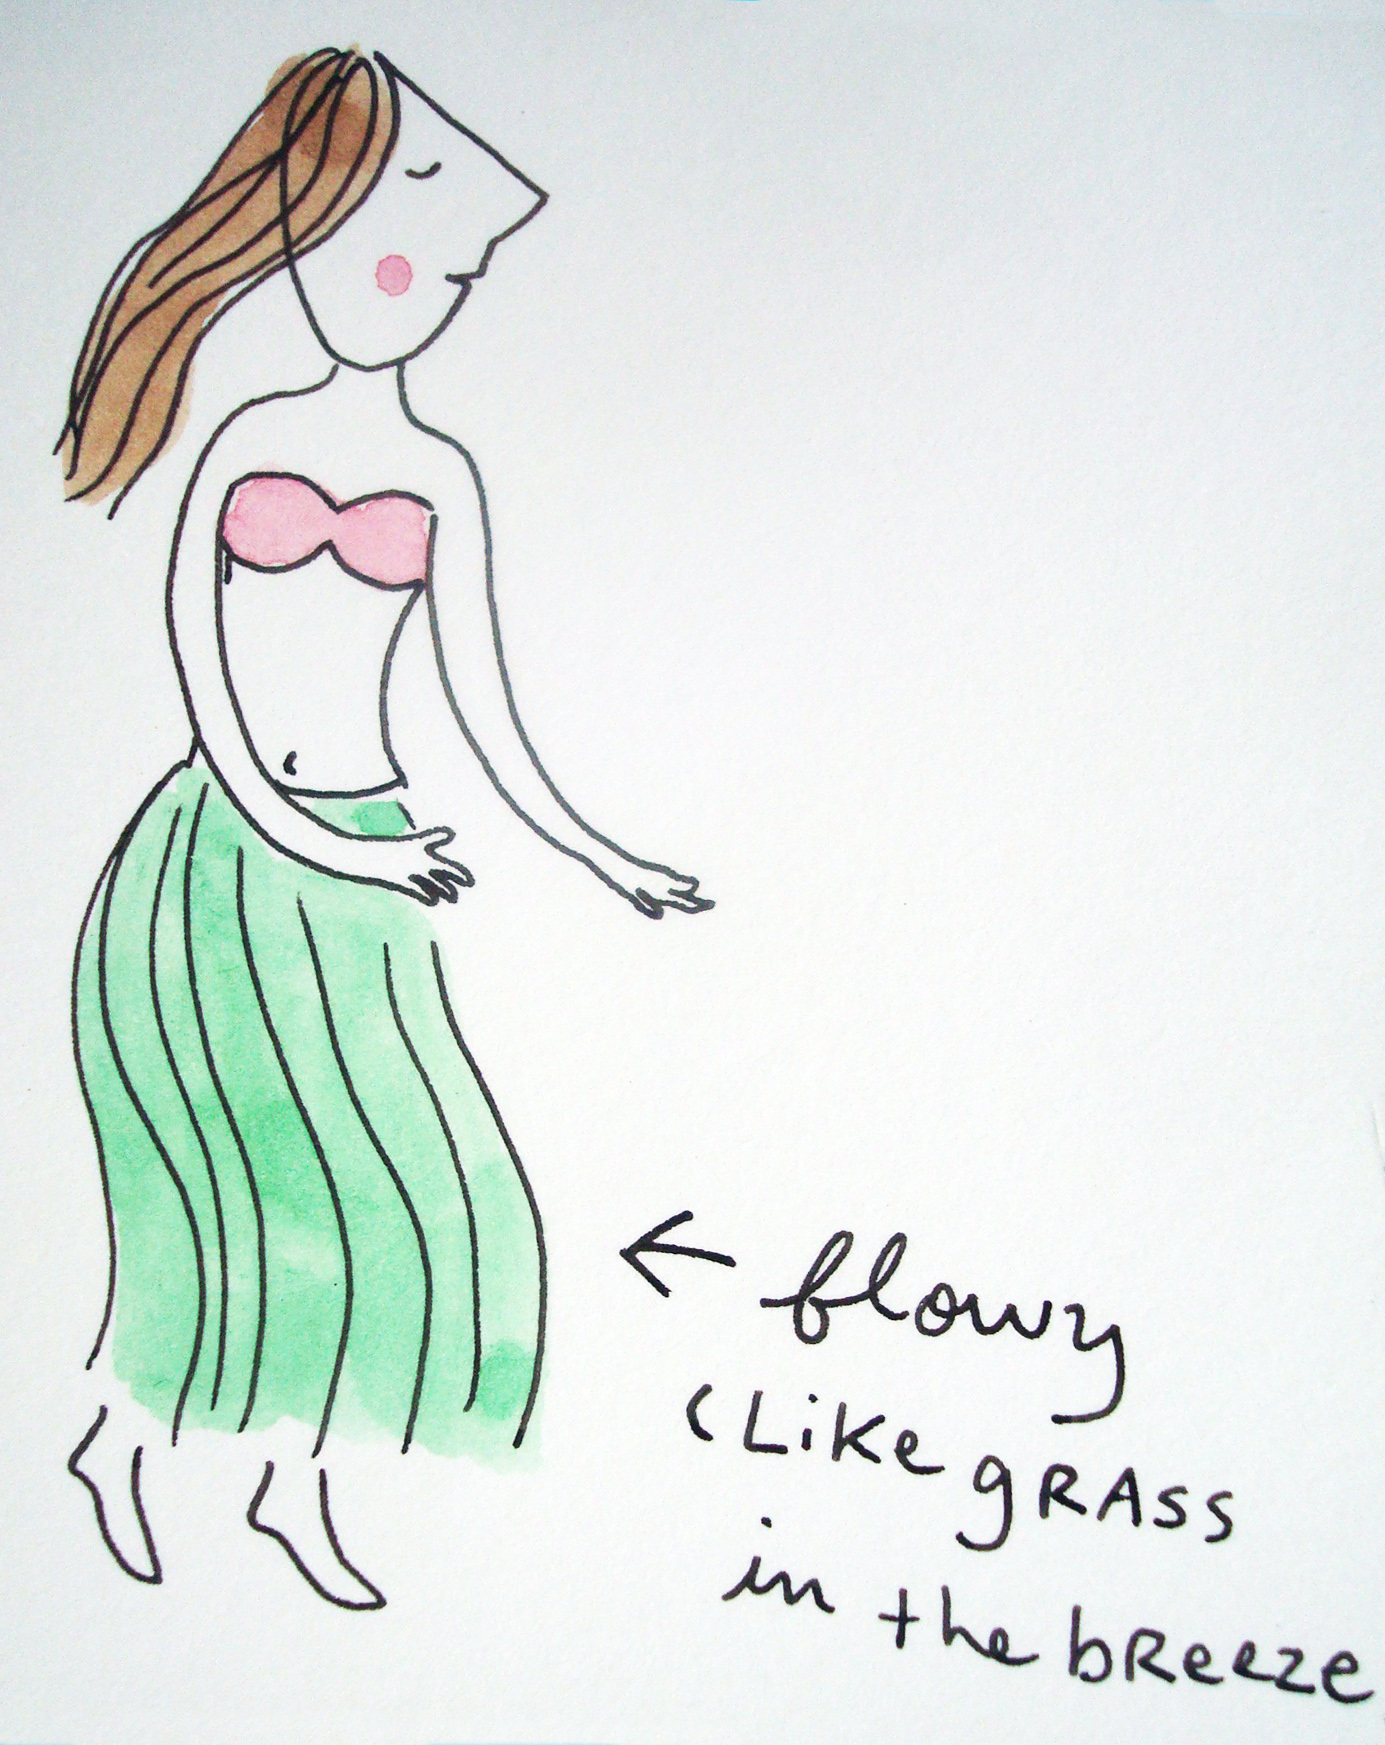 How to illustrate skirt in the breeze flowing